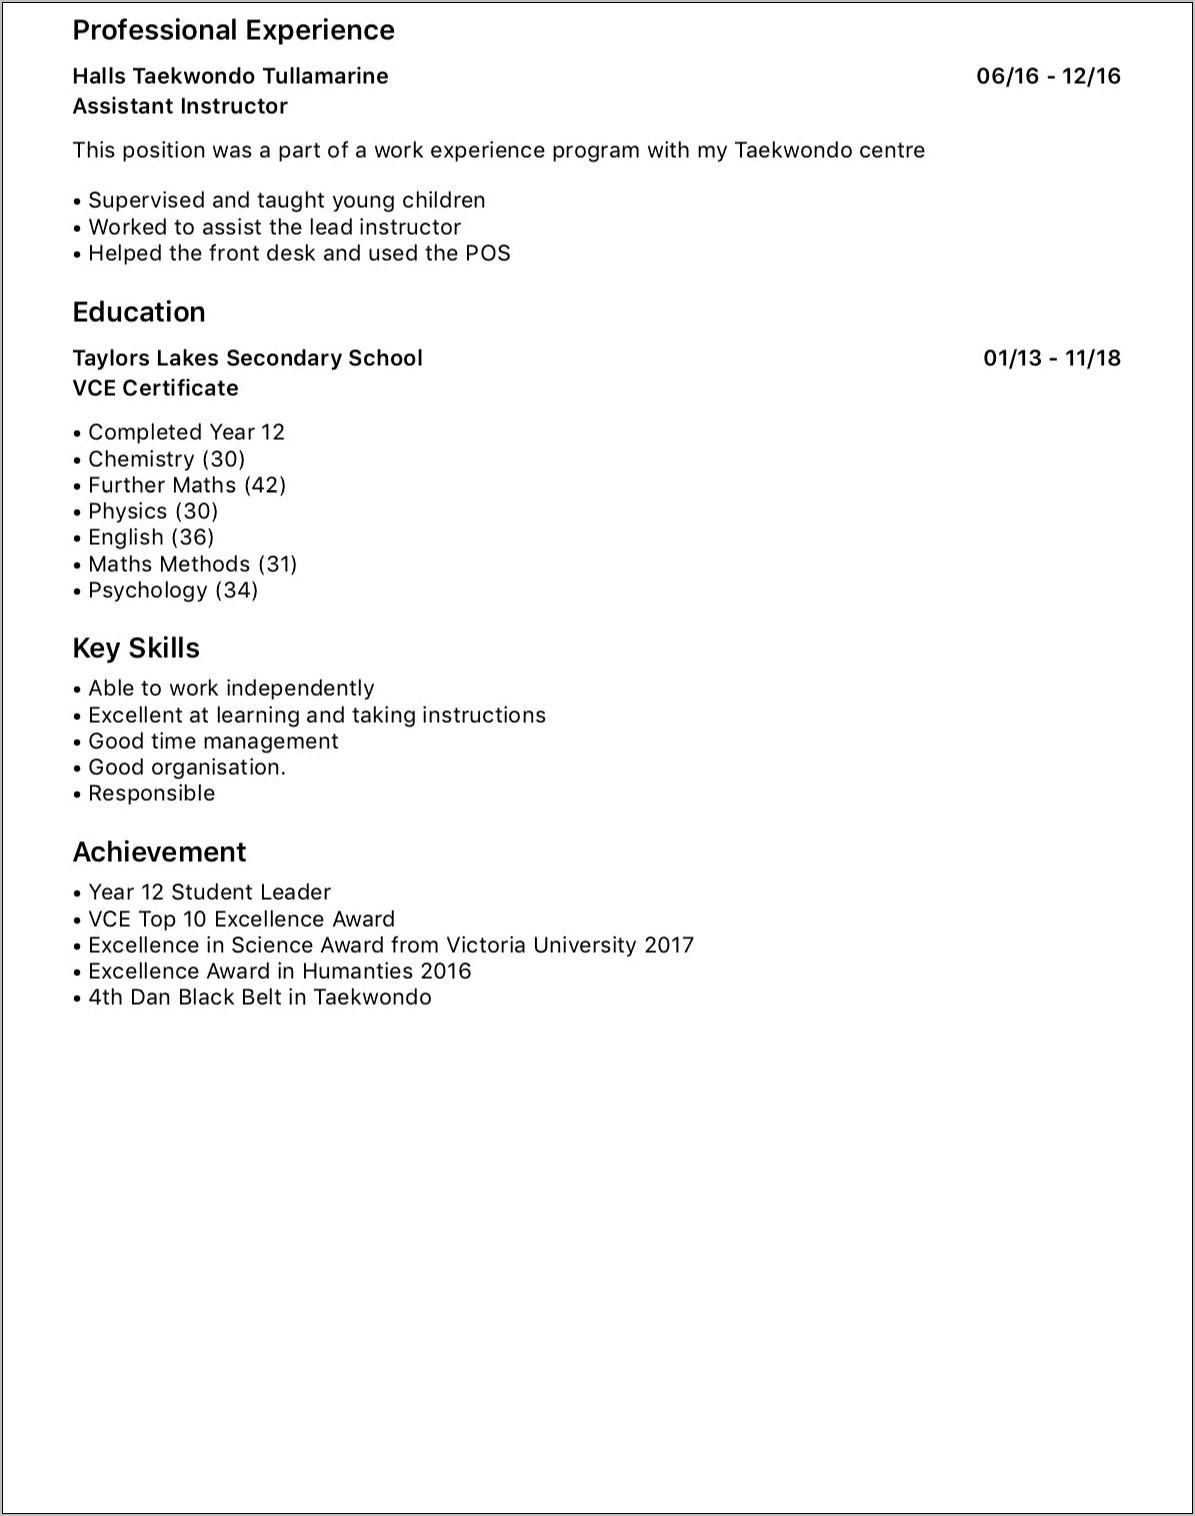 Resume Writing With Little Experience Reddit